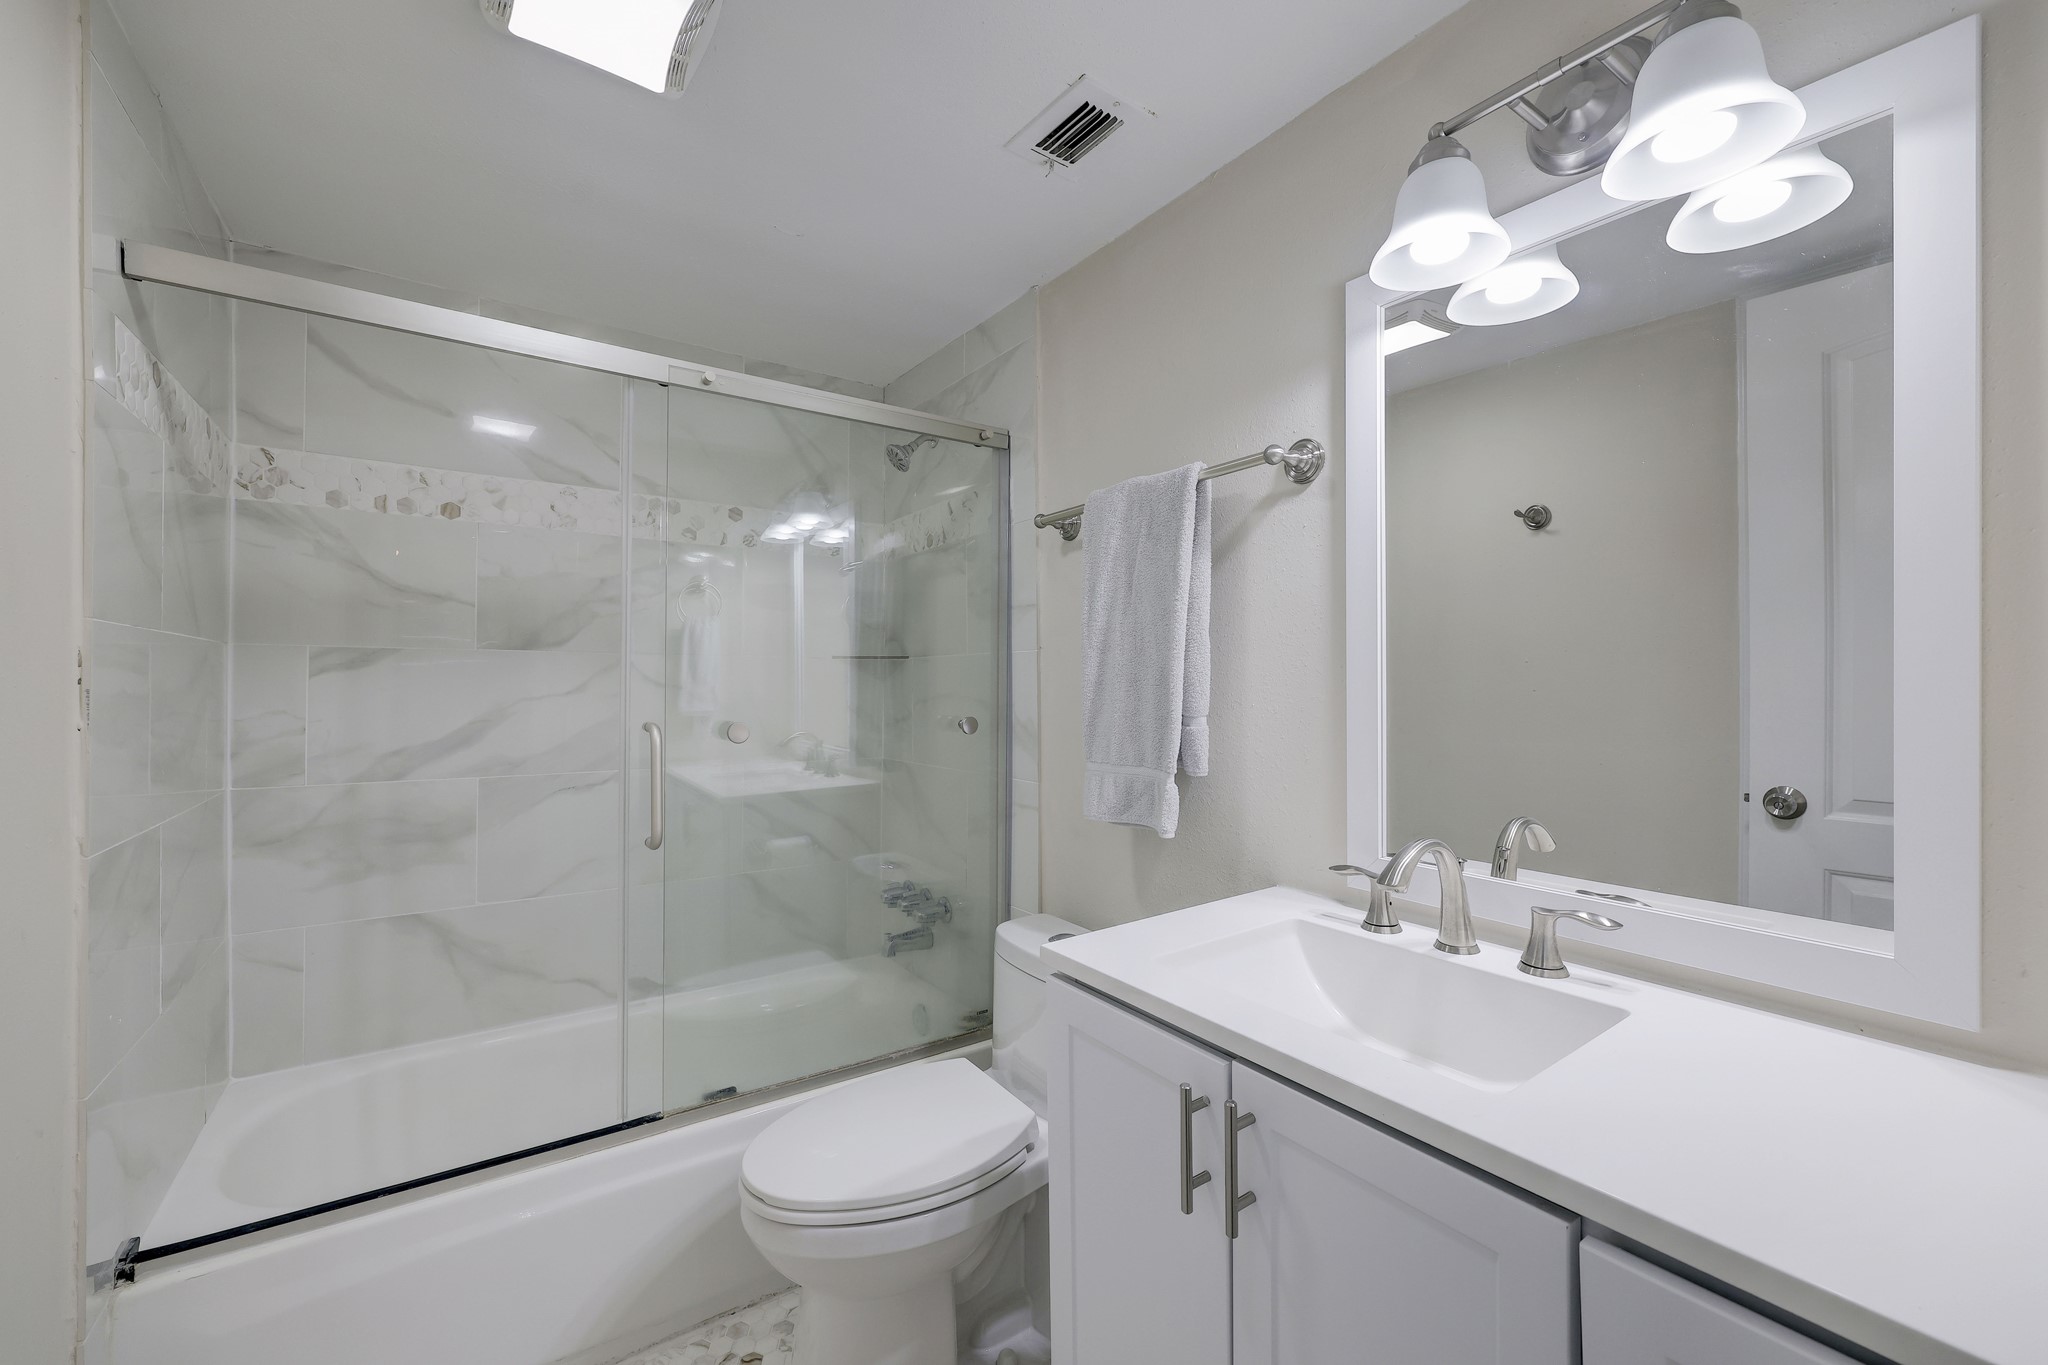 Glass enclosed tub/shower and lovely shower backsplash for easy cleaning